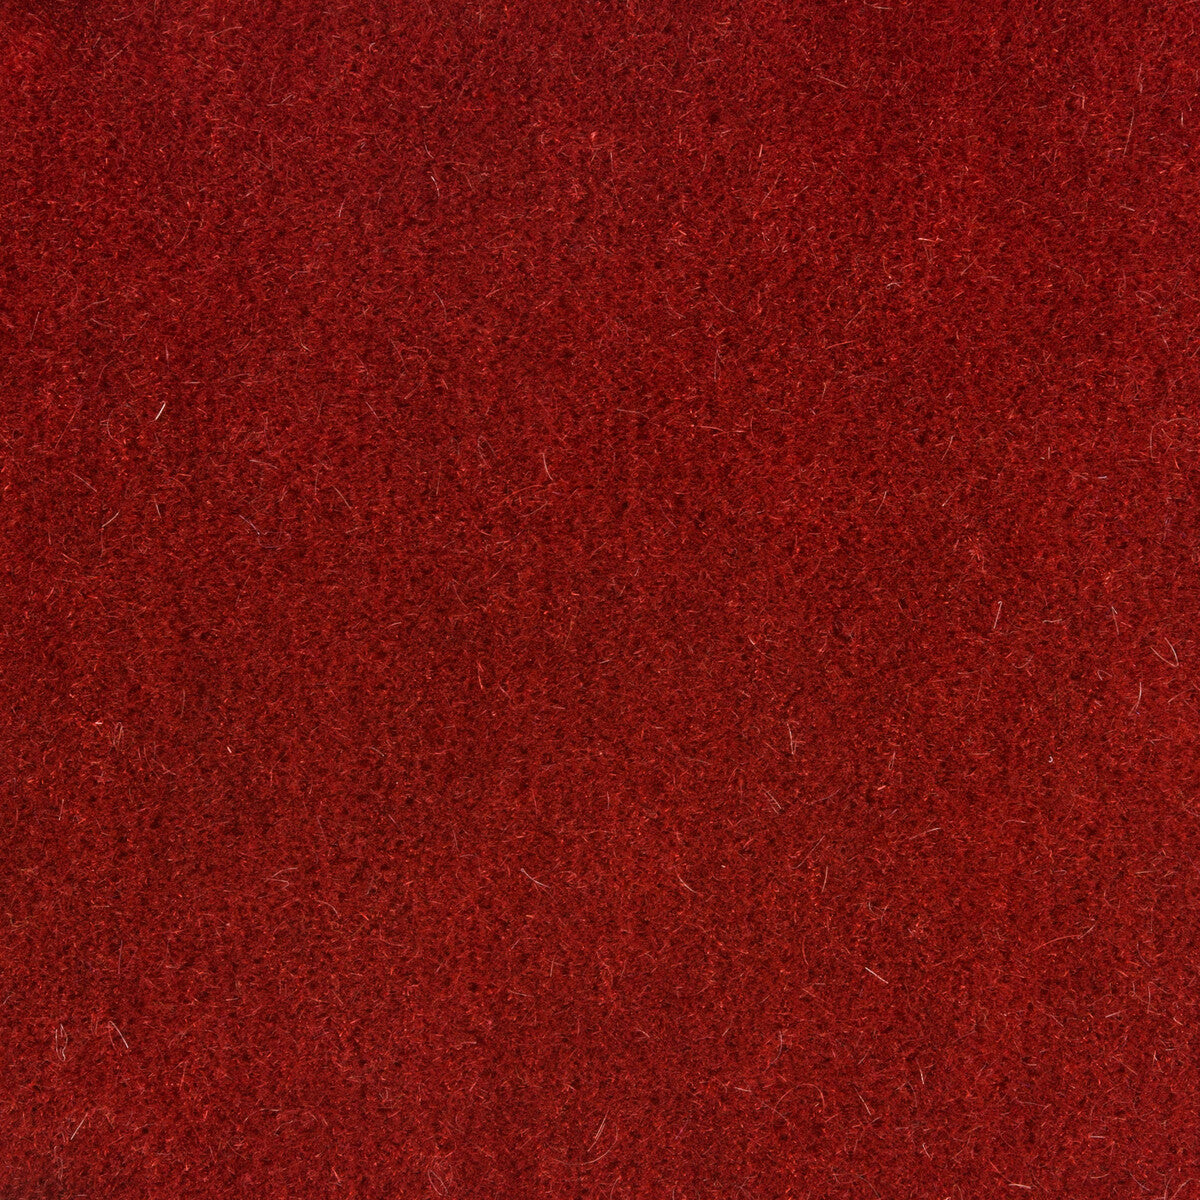 Windsor Mohair fabric in cinnabar color - pattern 34258.19.0 - by Kravet Couture